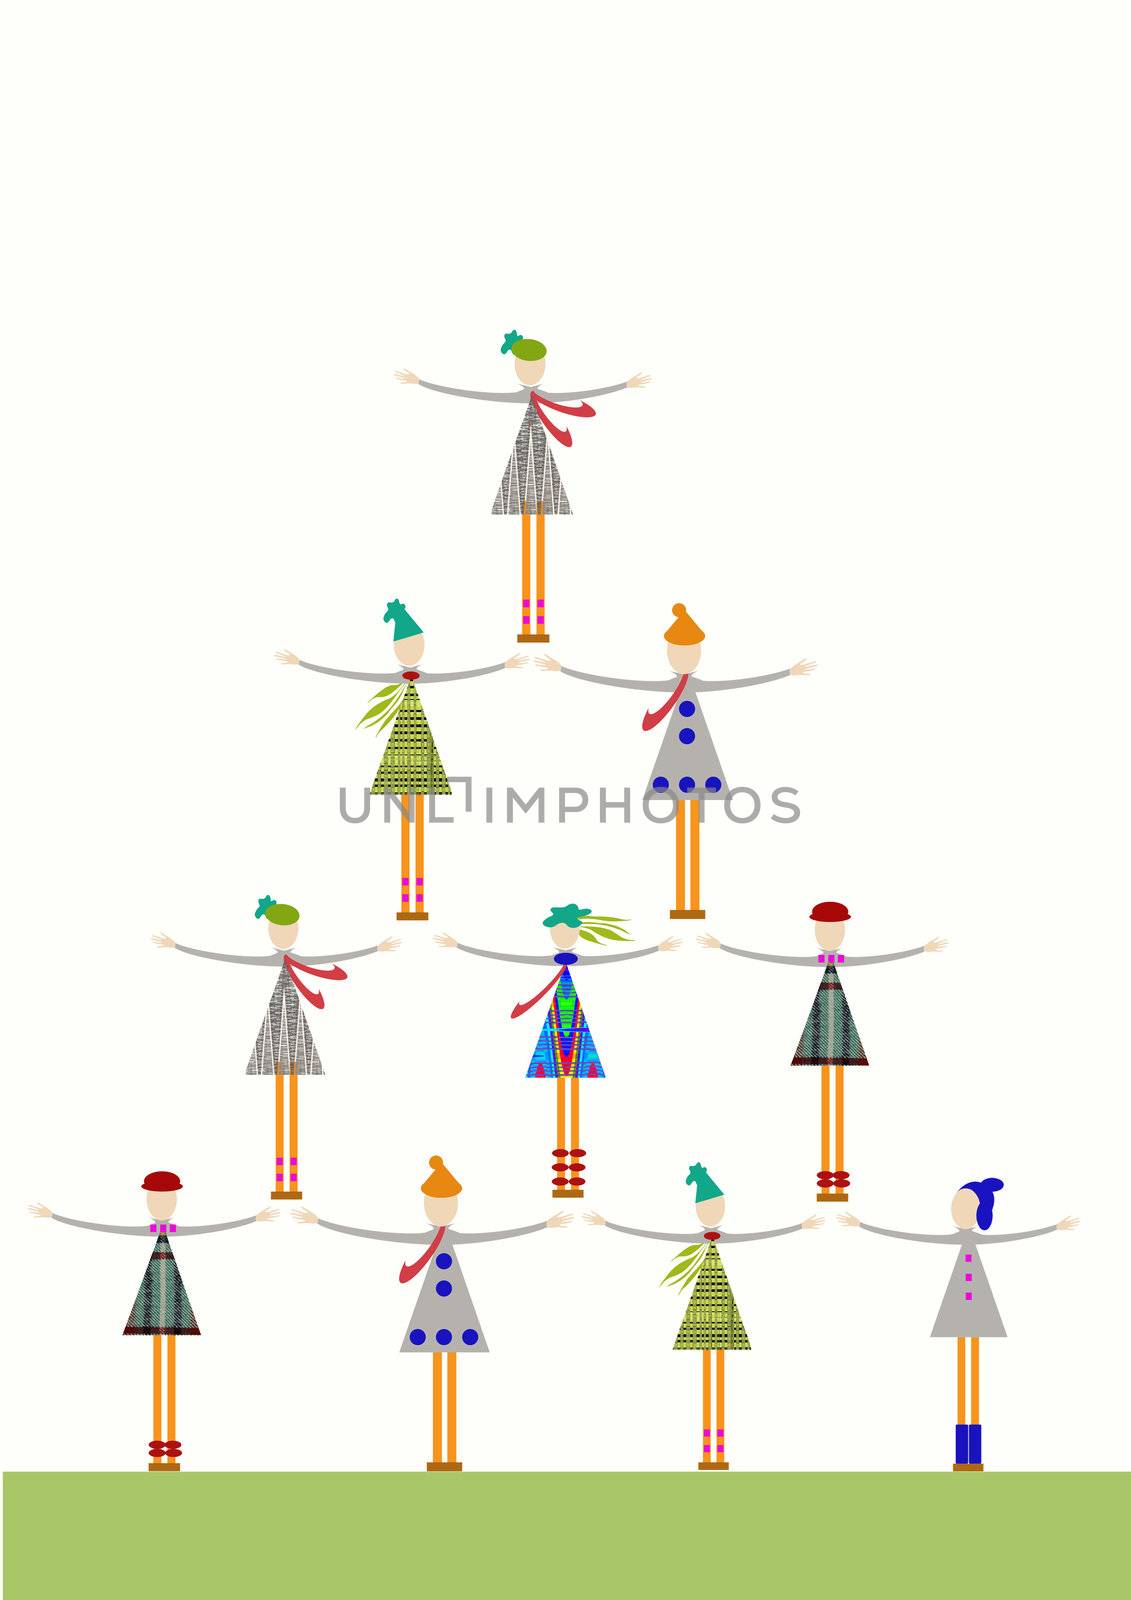 Christmas tree formed by people